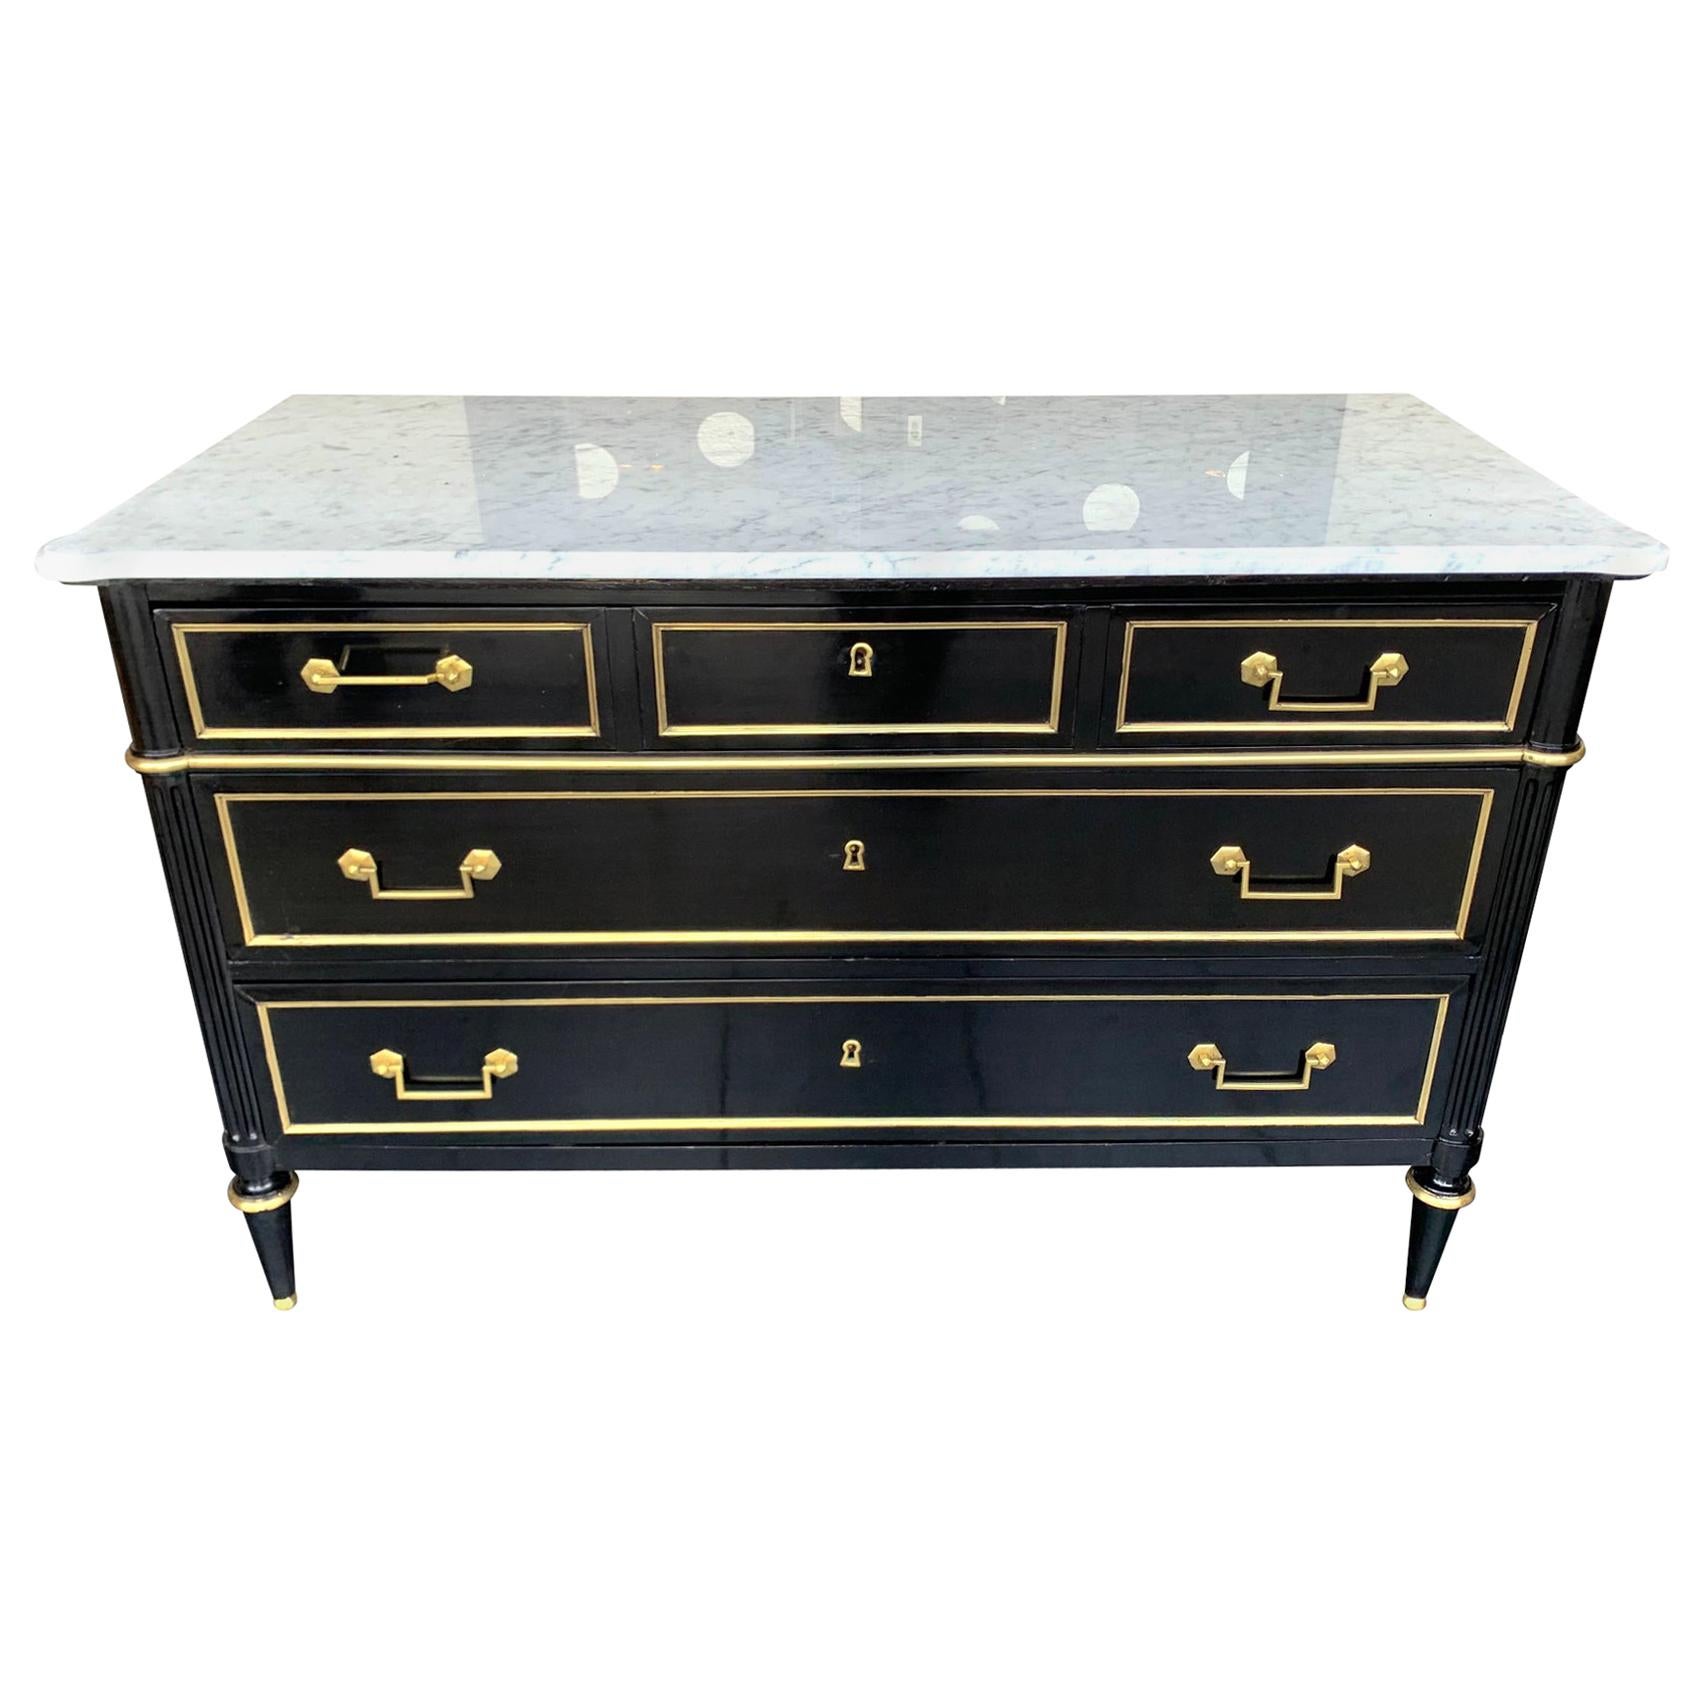 Lovely Antique French Louis XVI Style Ebonised Commode with Carrara Marble Top